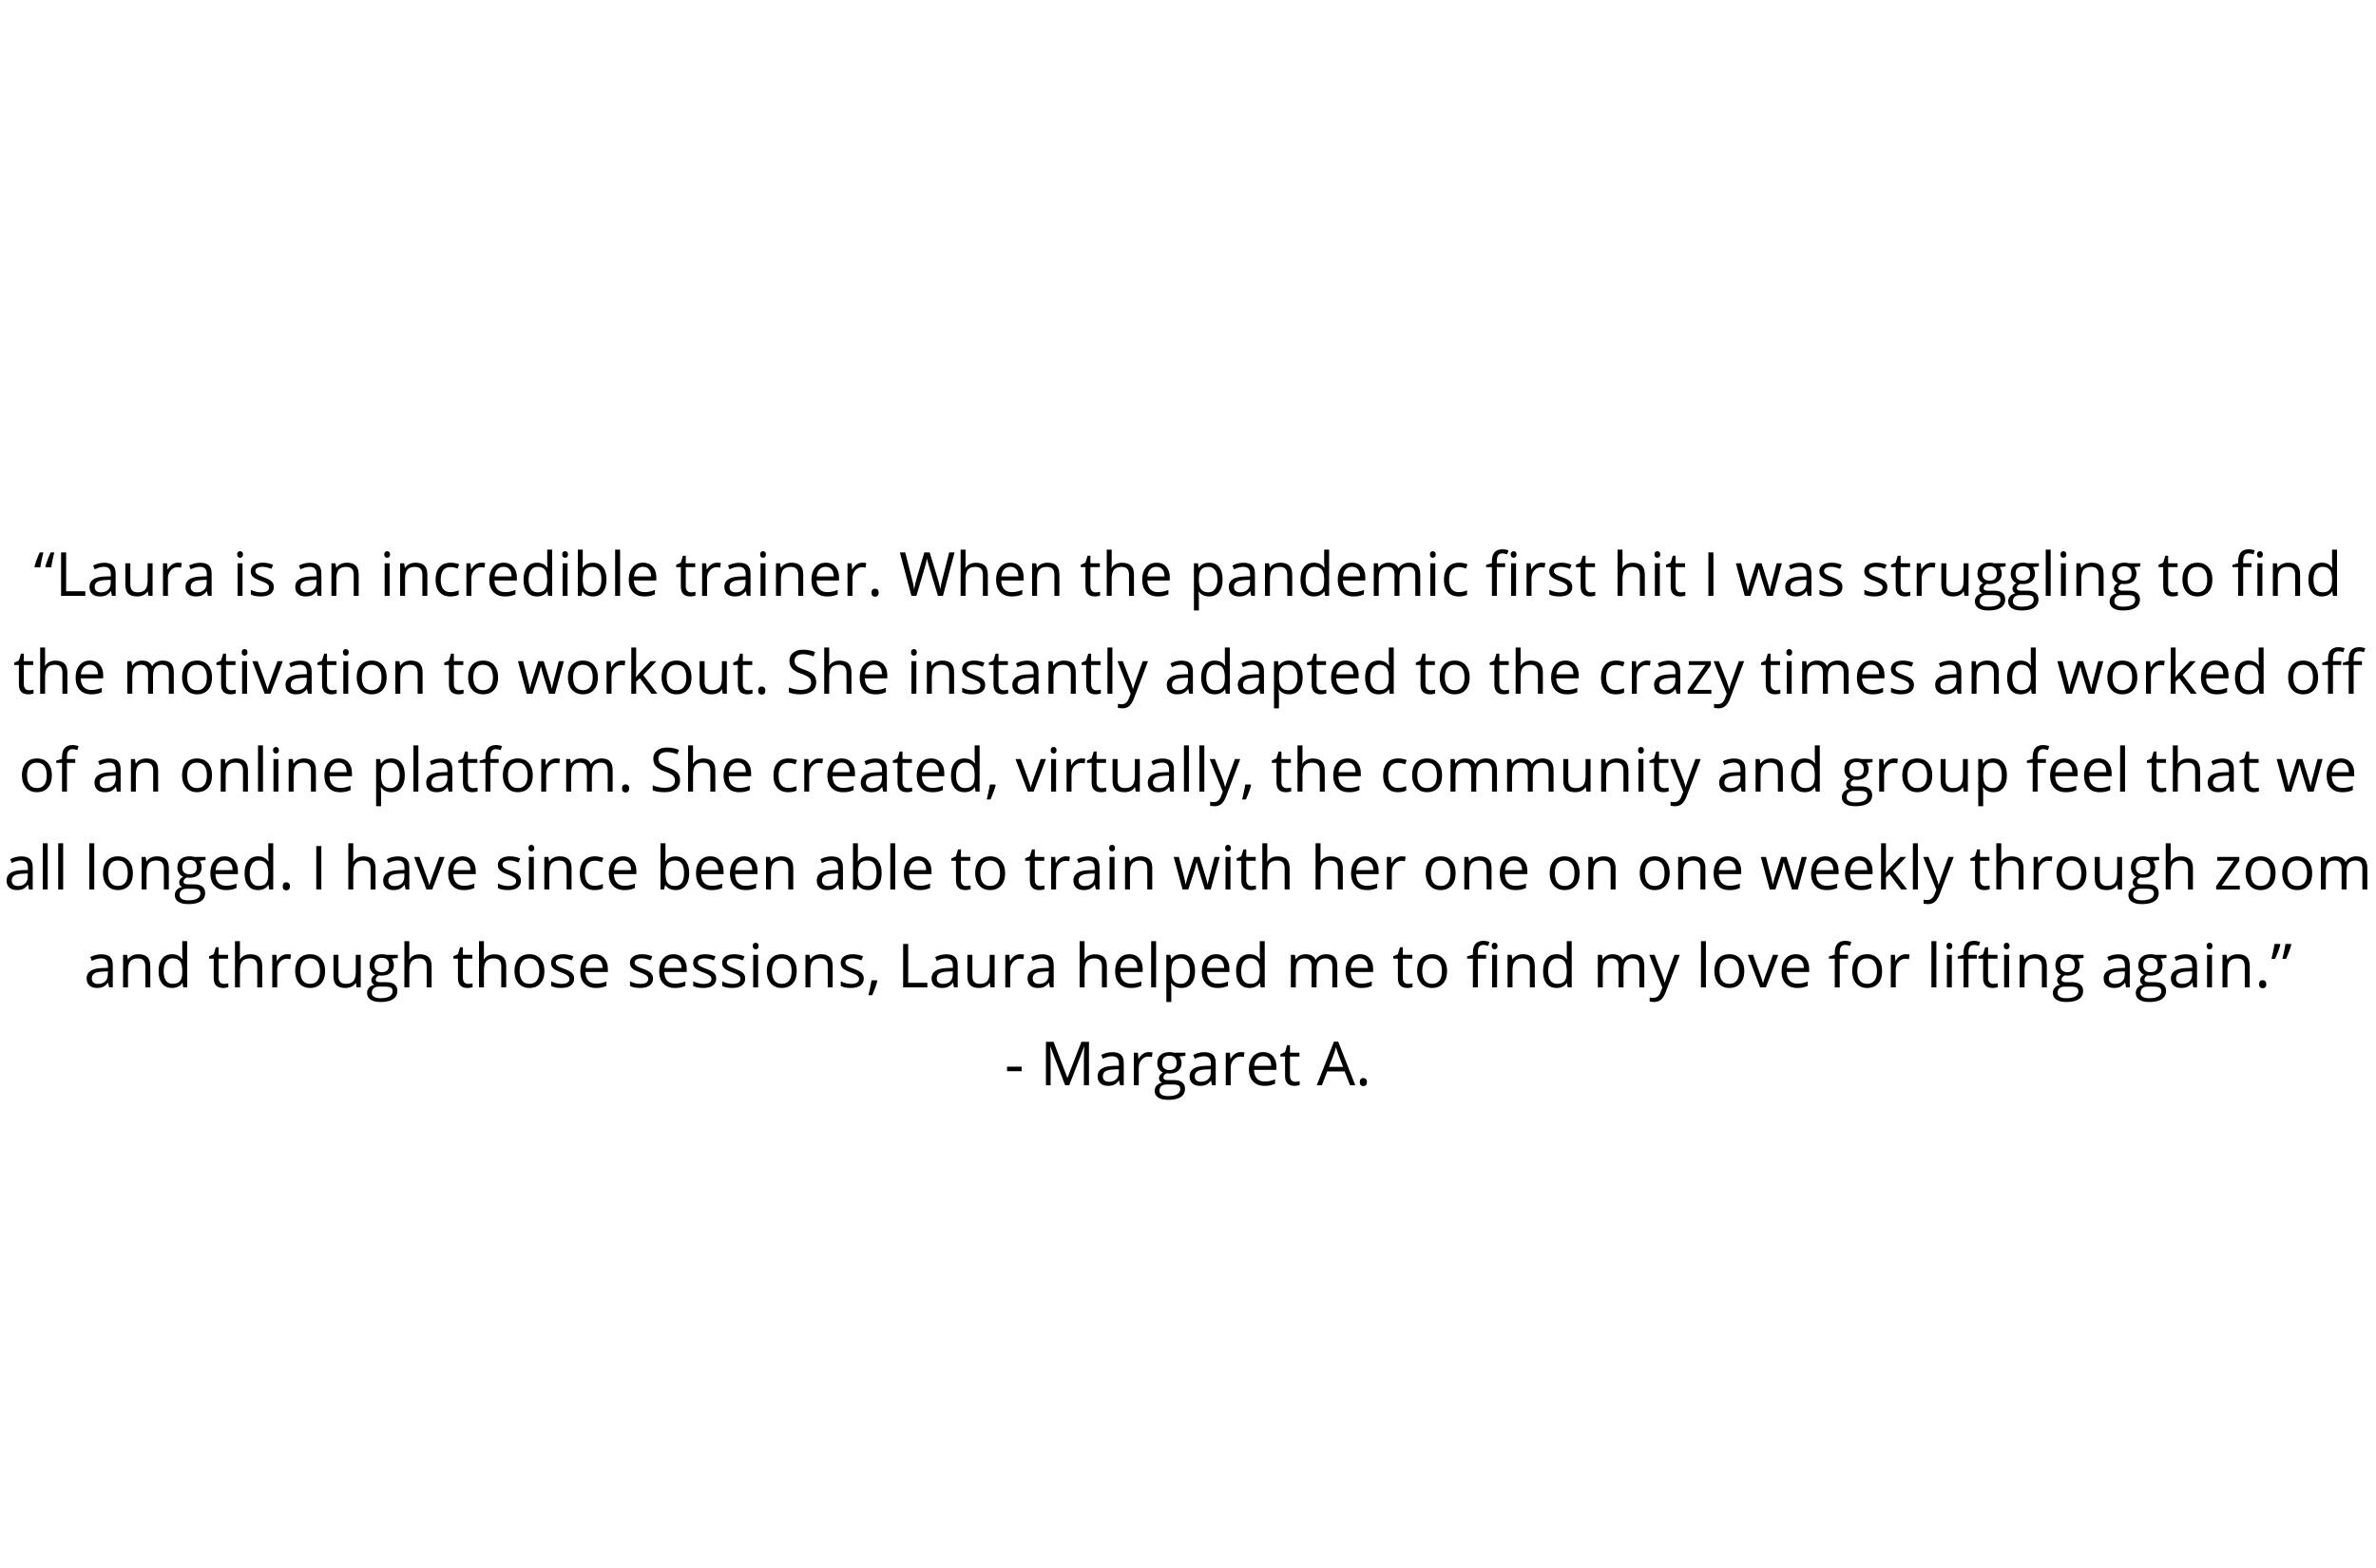 “Laura is an incredible trainer. When the pandemic first hit I was struggling to find the motivation to workout. She instantly adapted to the crazy times and worked off of an online platform. She created, virtually, .jpg